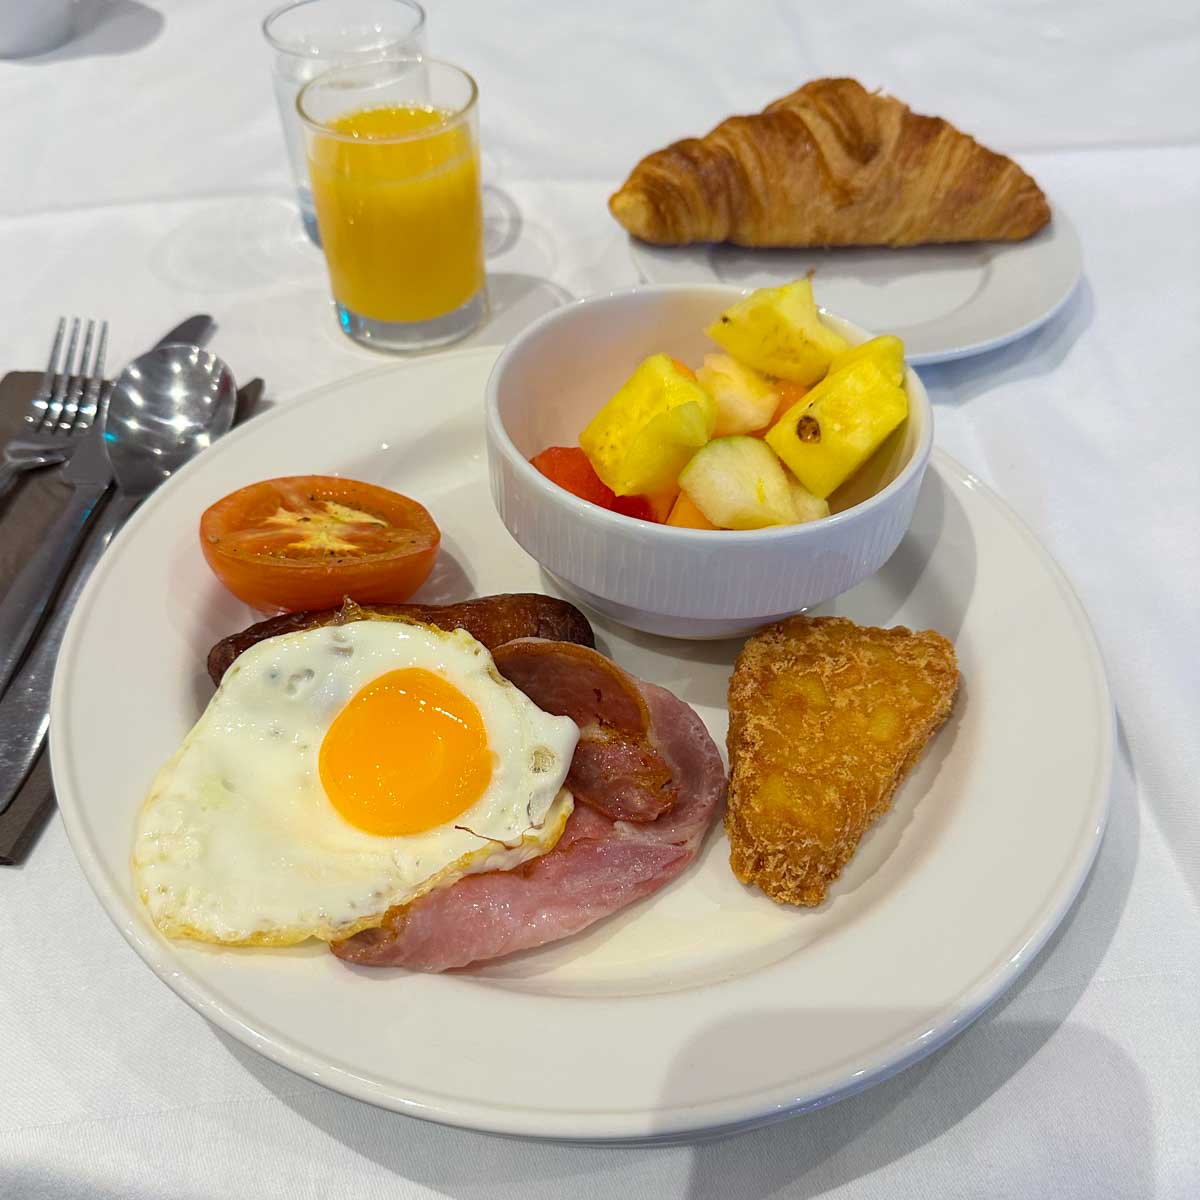 A breakfast plate at an Irish hotel serves the traditional breakfast of fried egg with ham, hashbrown, and tomato.